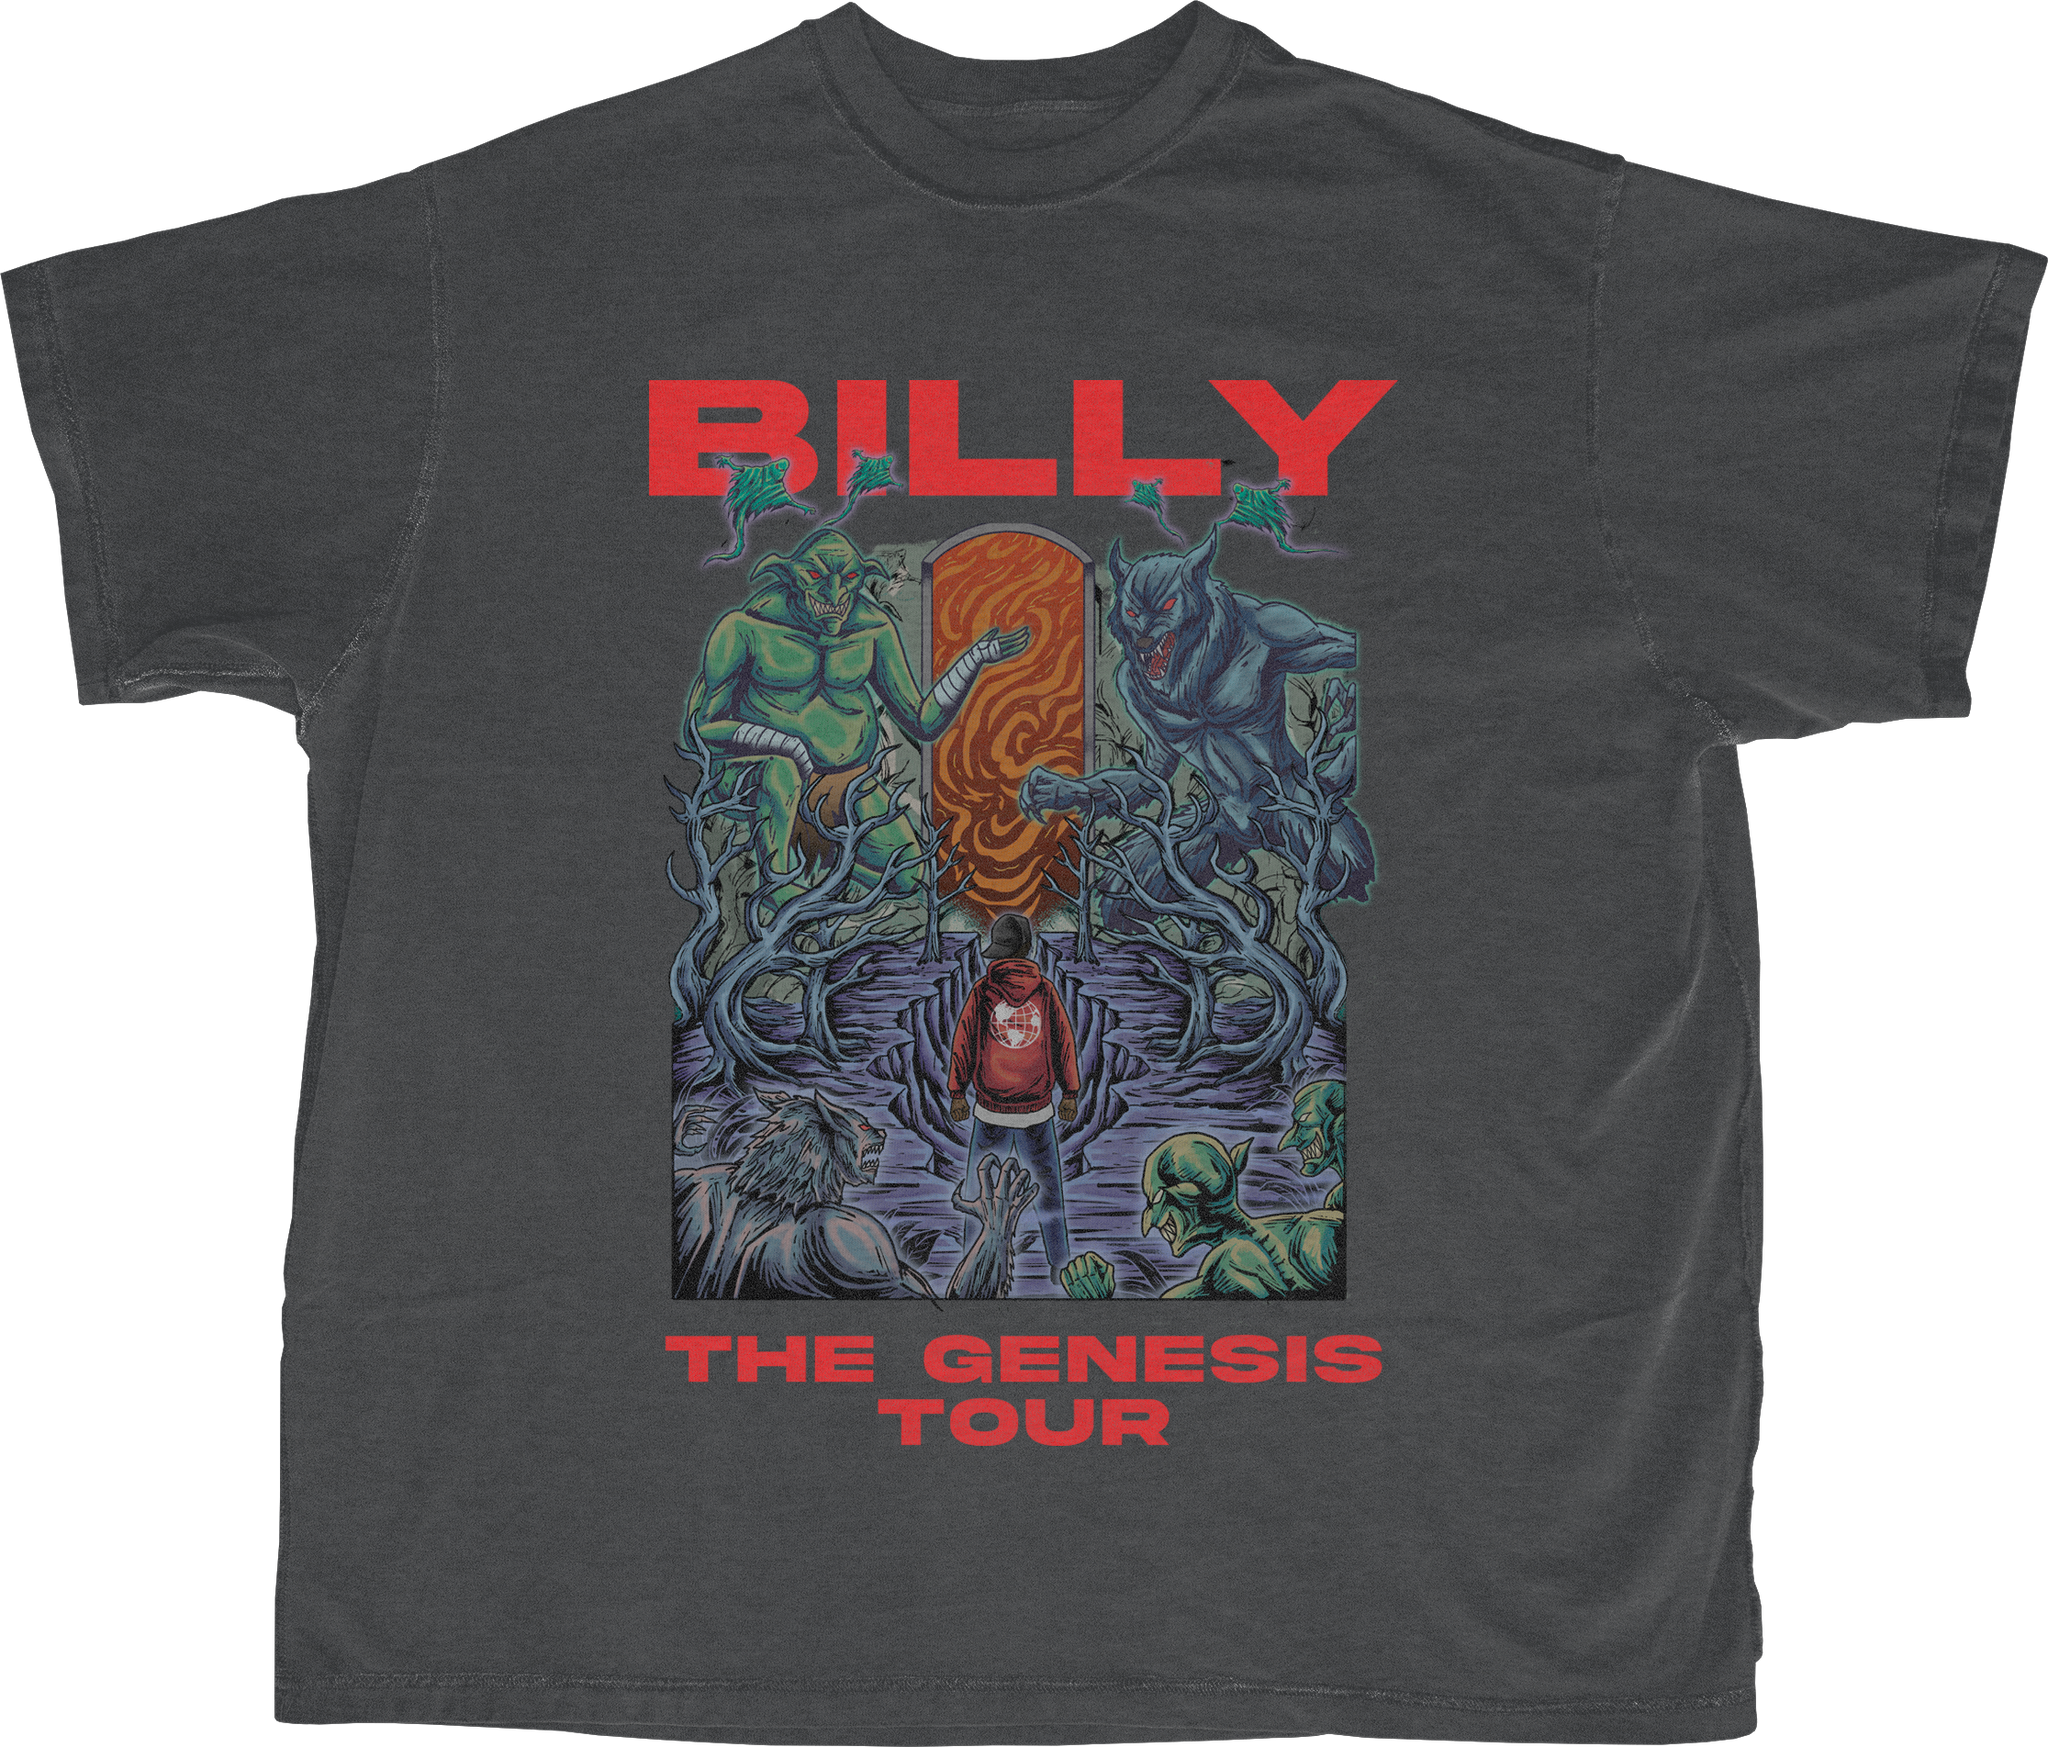 The Official 'Genesis Tour’ Tee